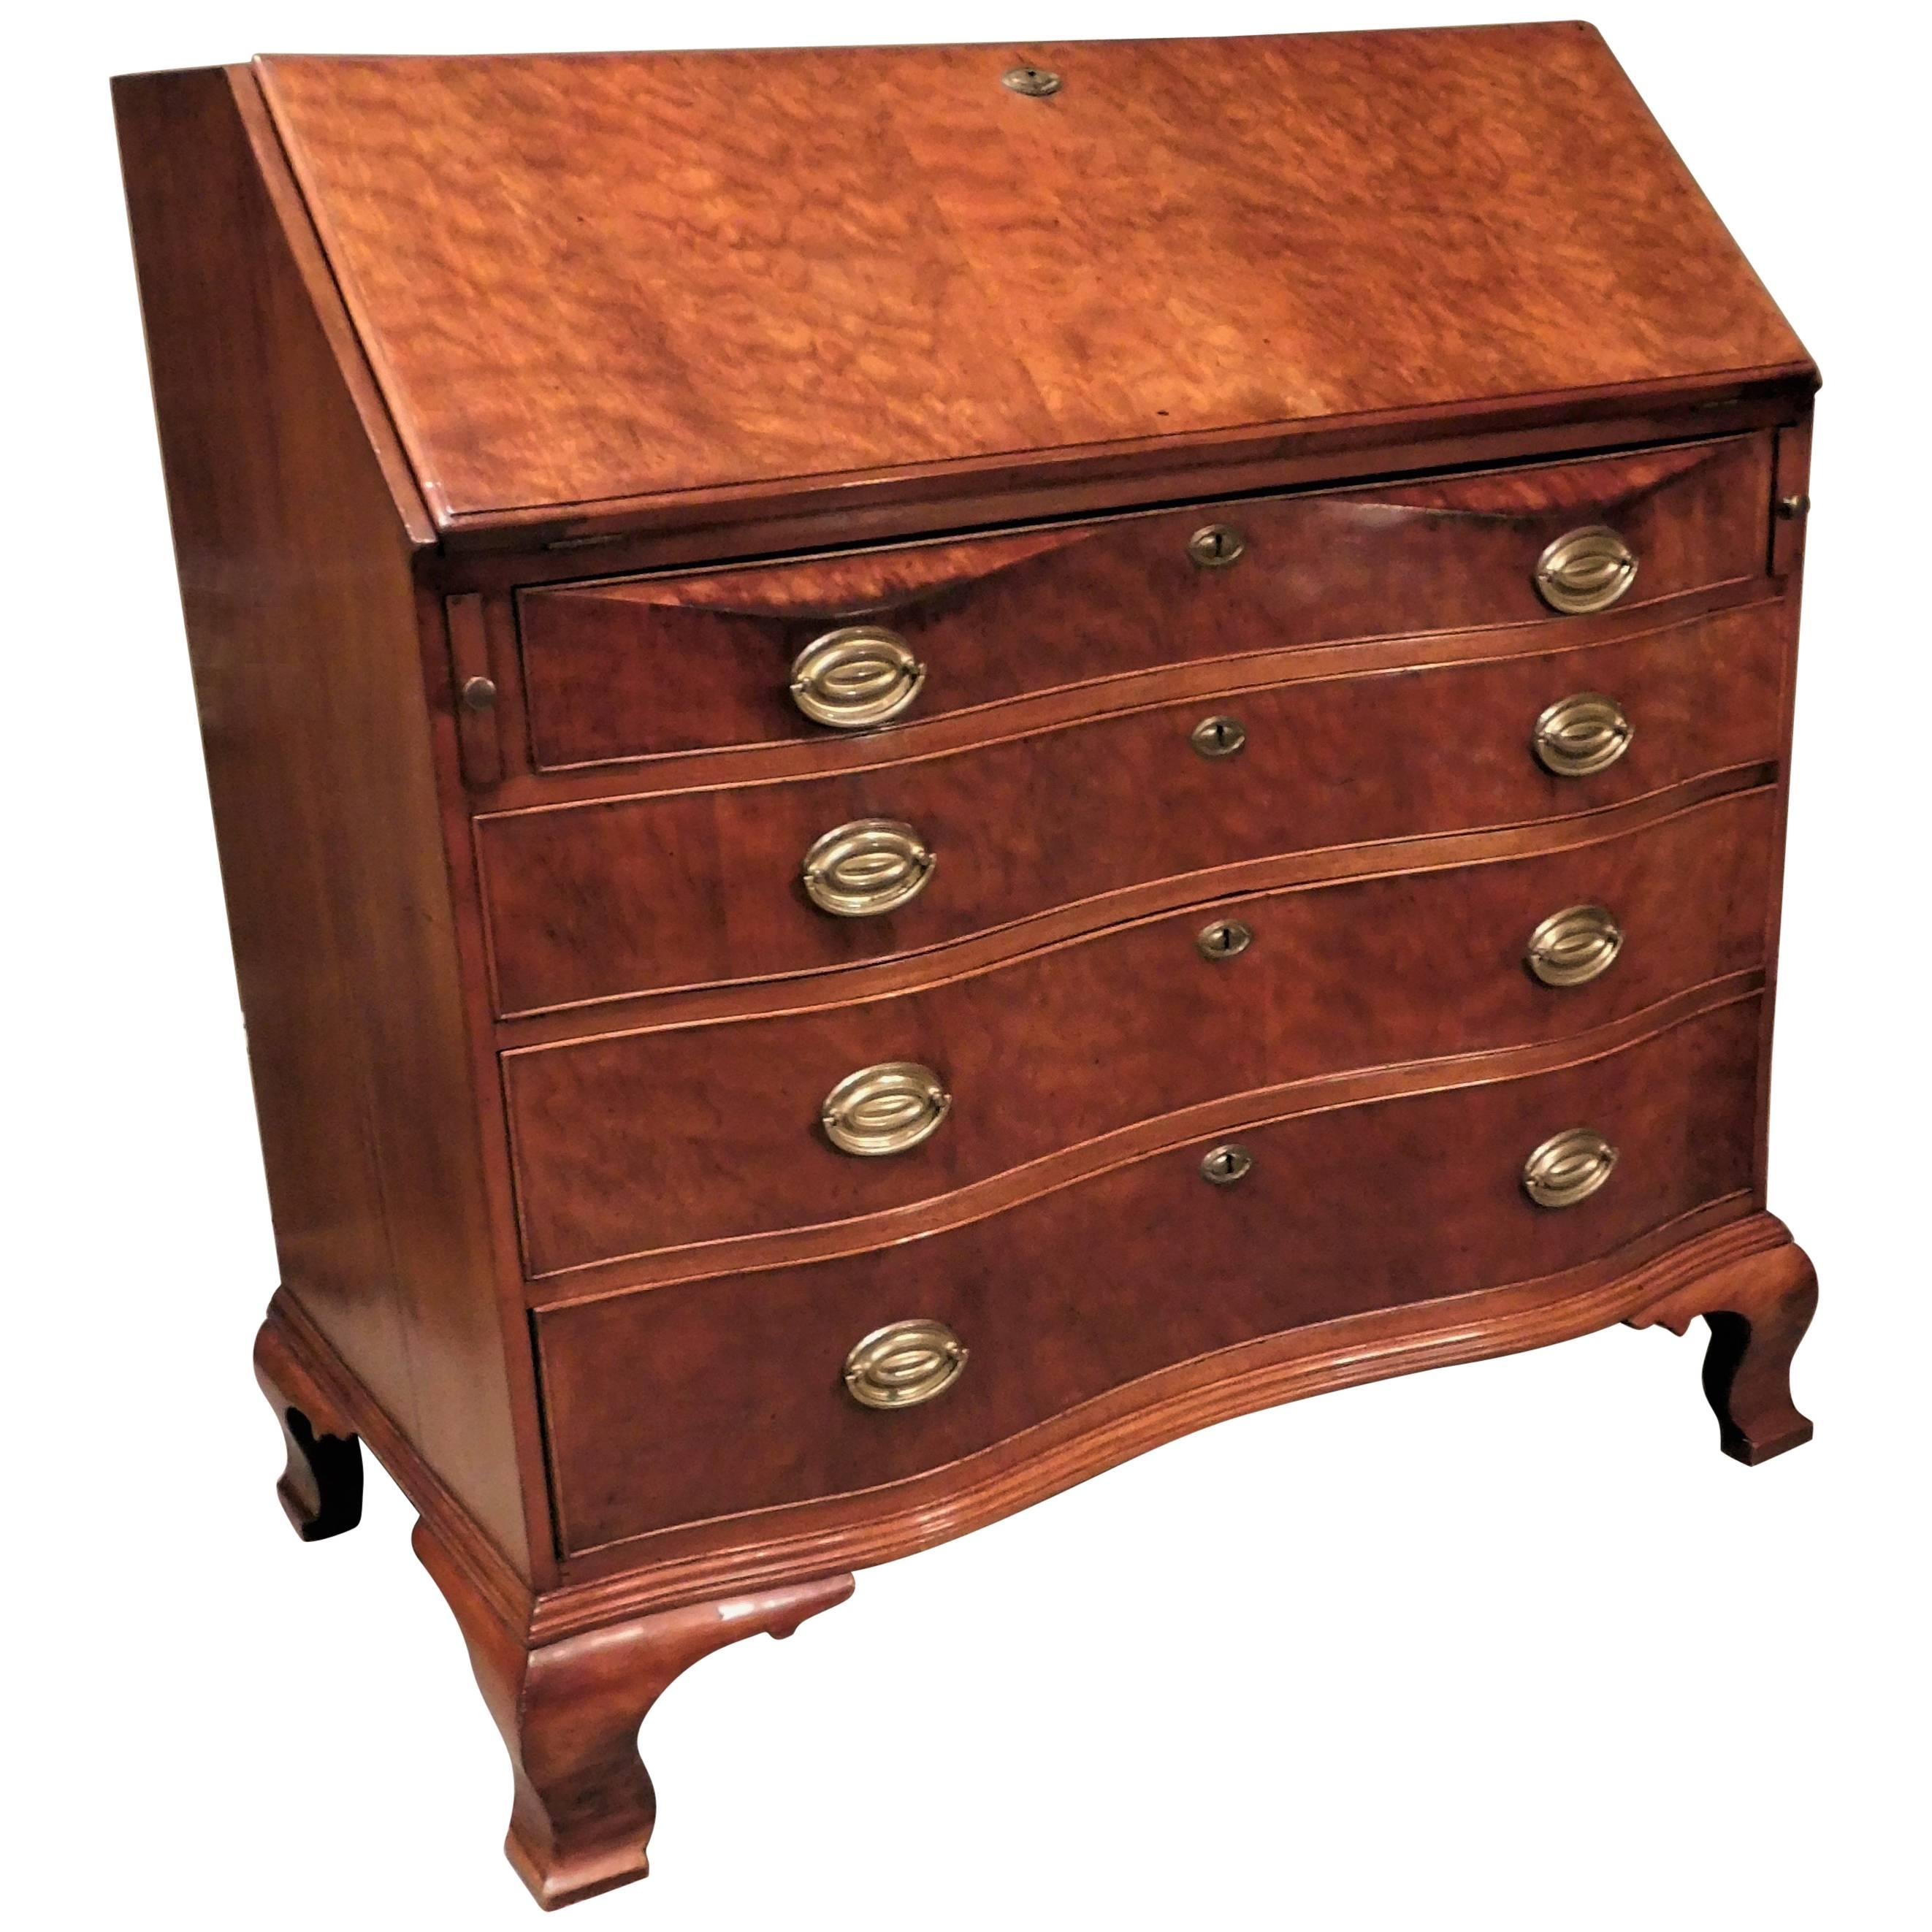 Pollarded Walnut Oxbow Chippendale Fall-Front Desk, Massachusetts, circa 1780 For Sale